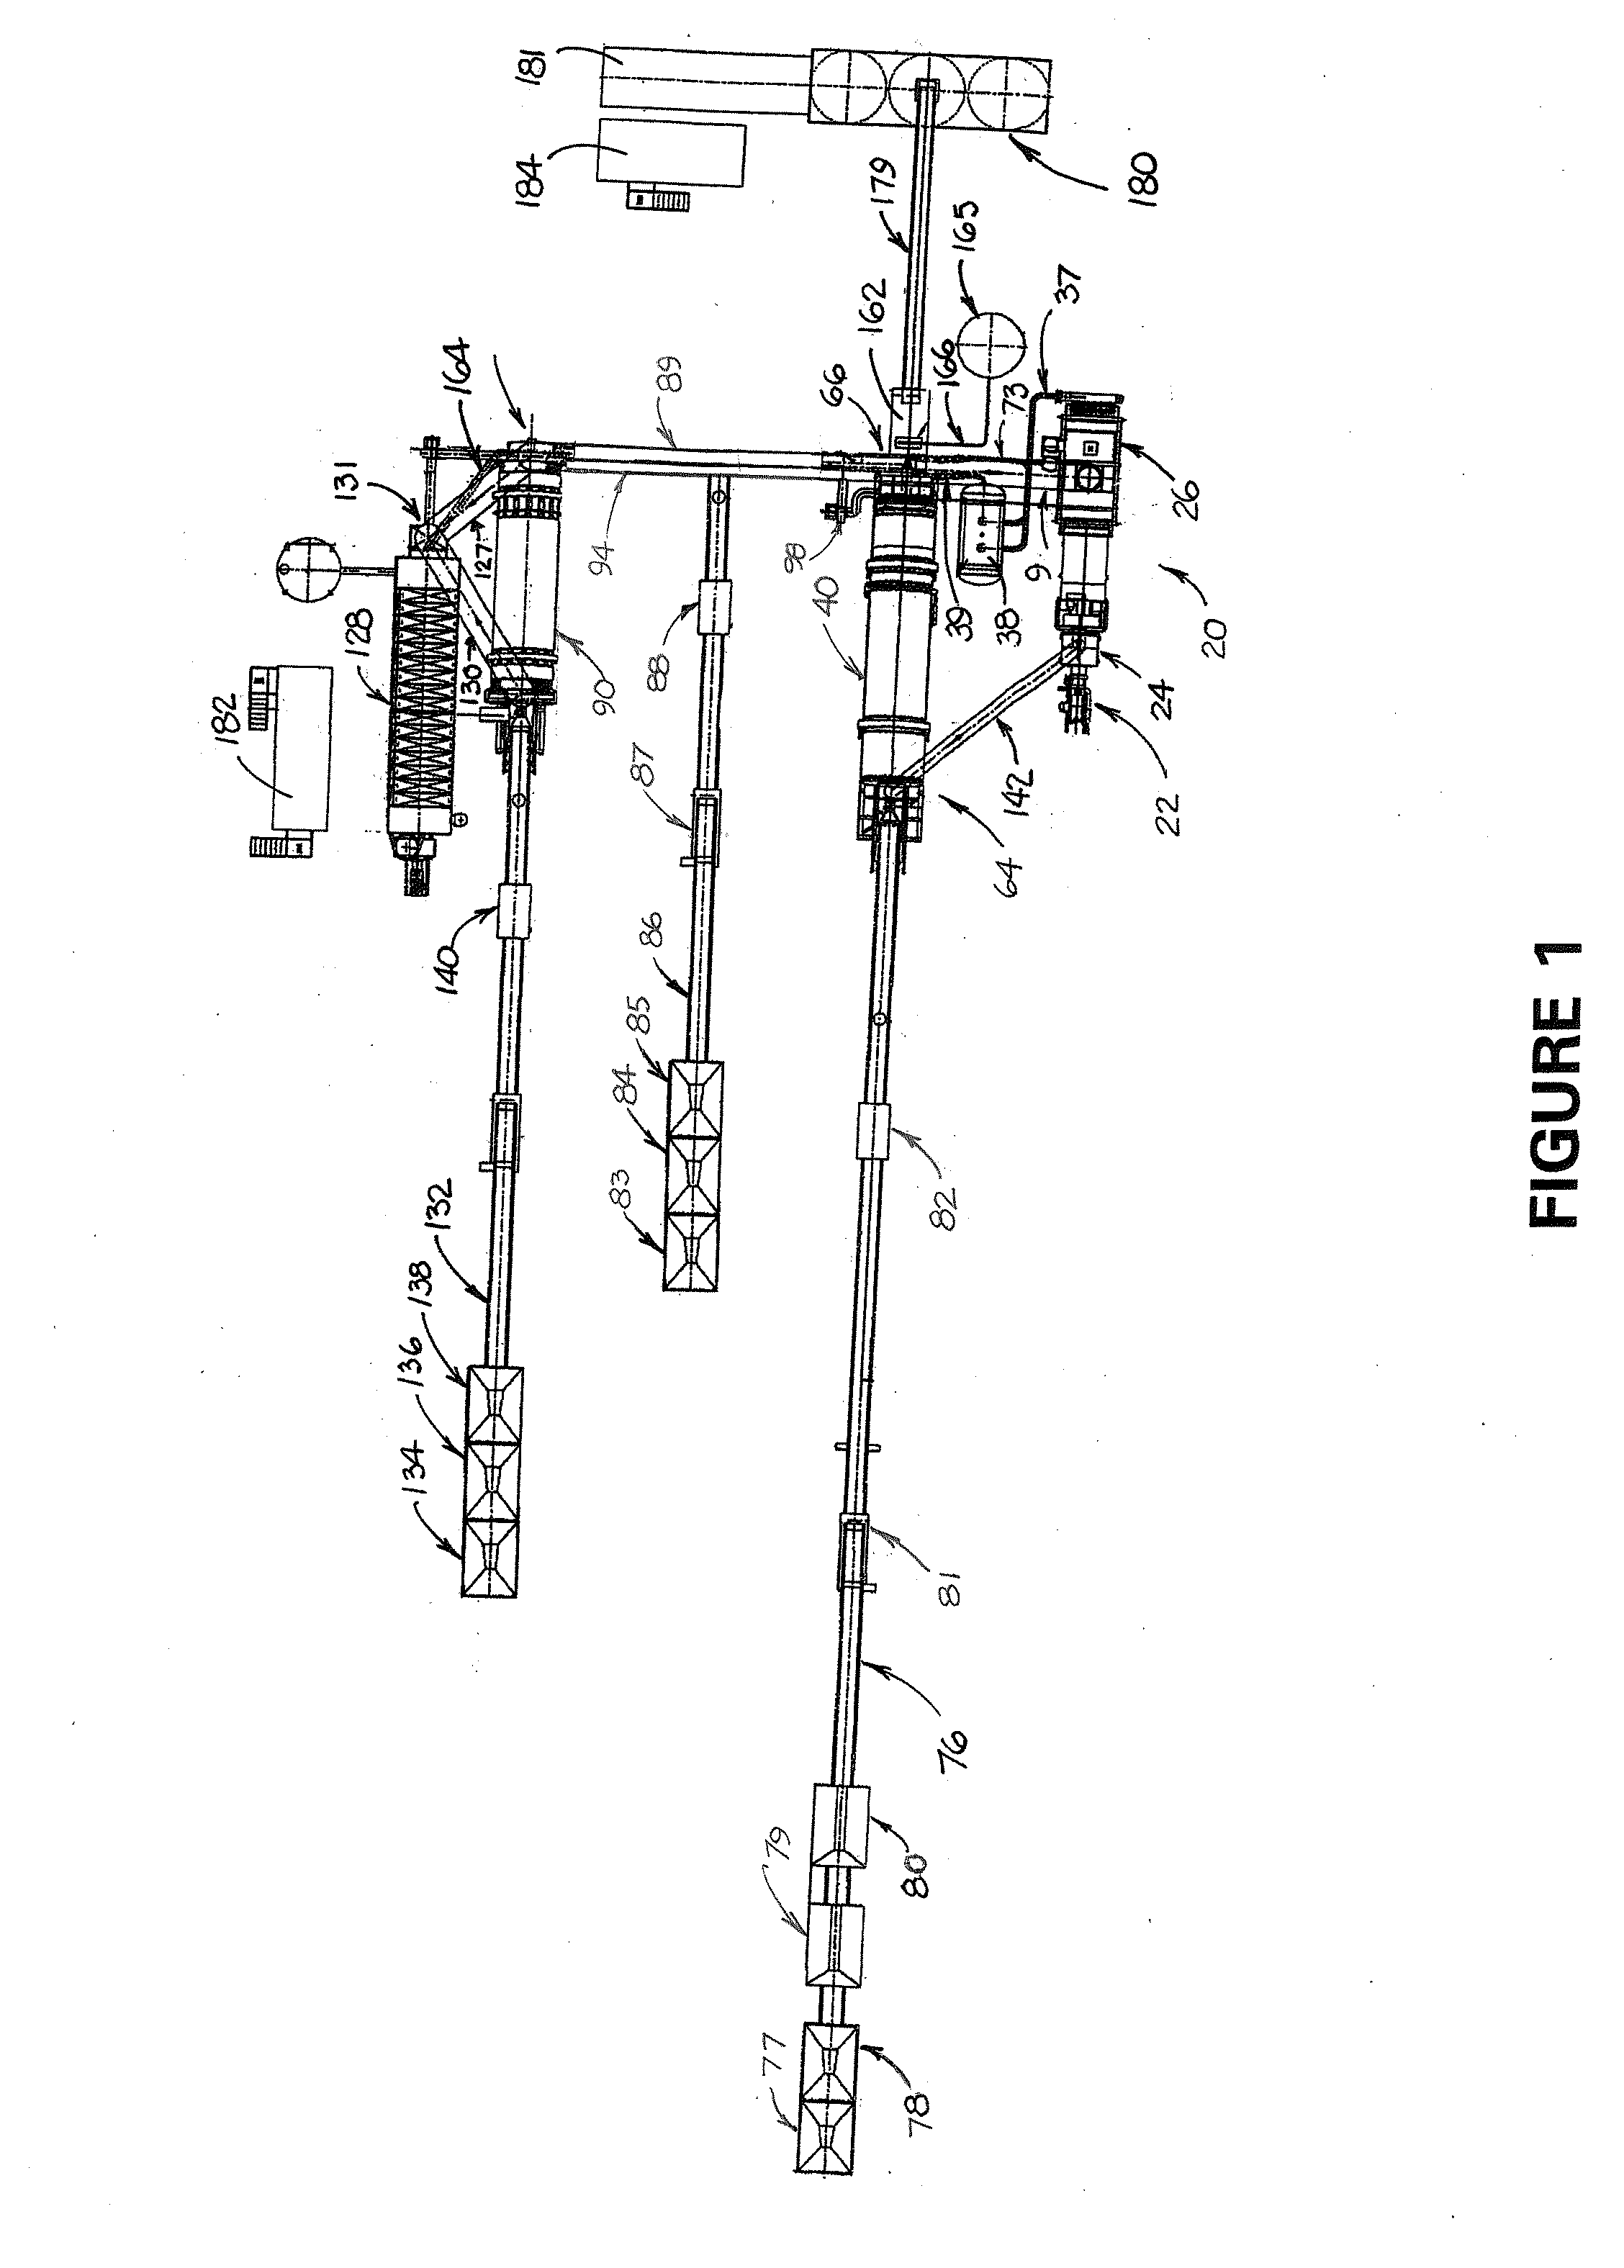 Method and apparatus for making asphalt concrete using aggregate material from a plurality of material streams